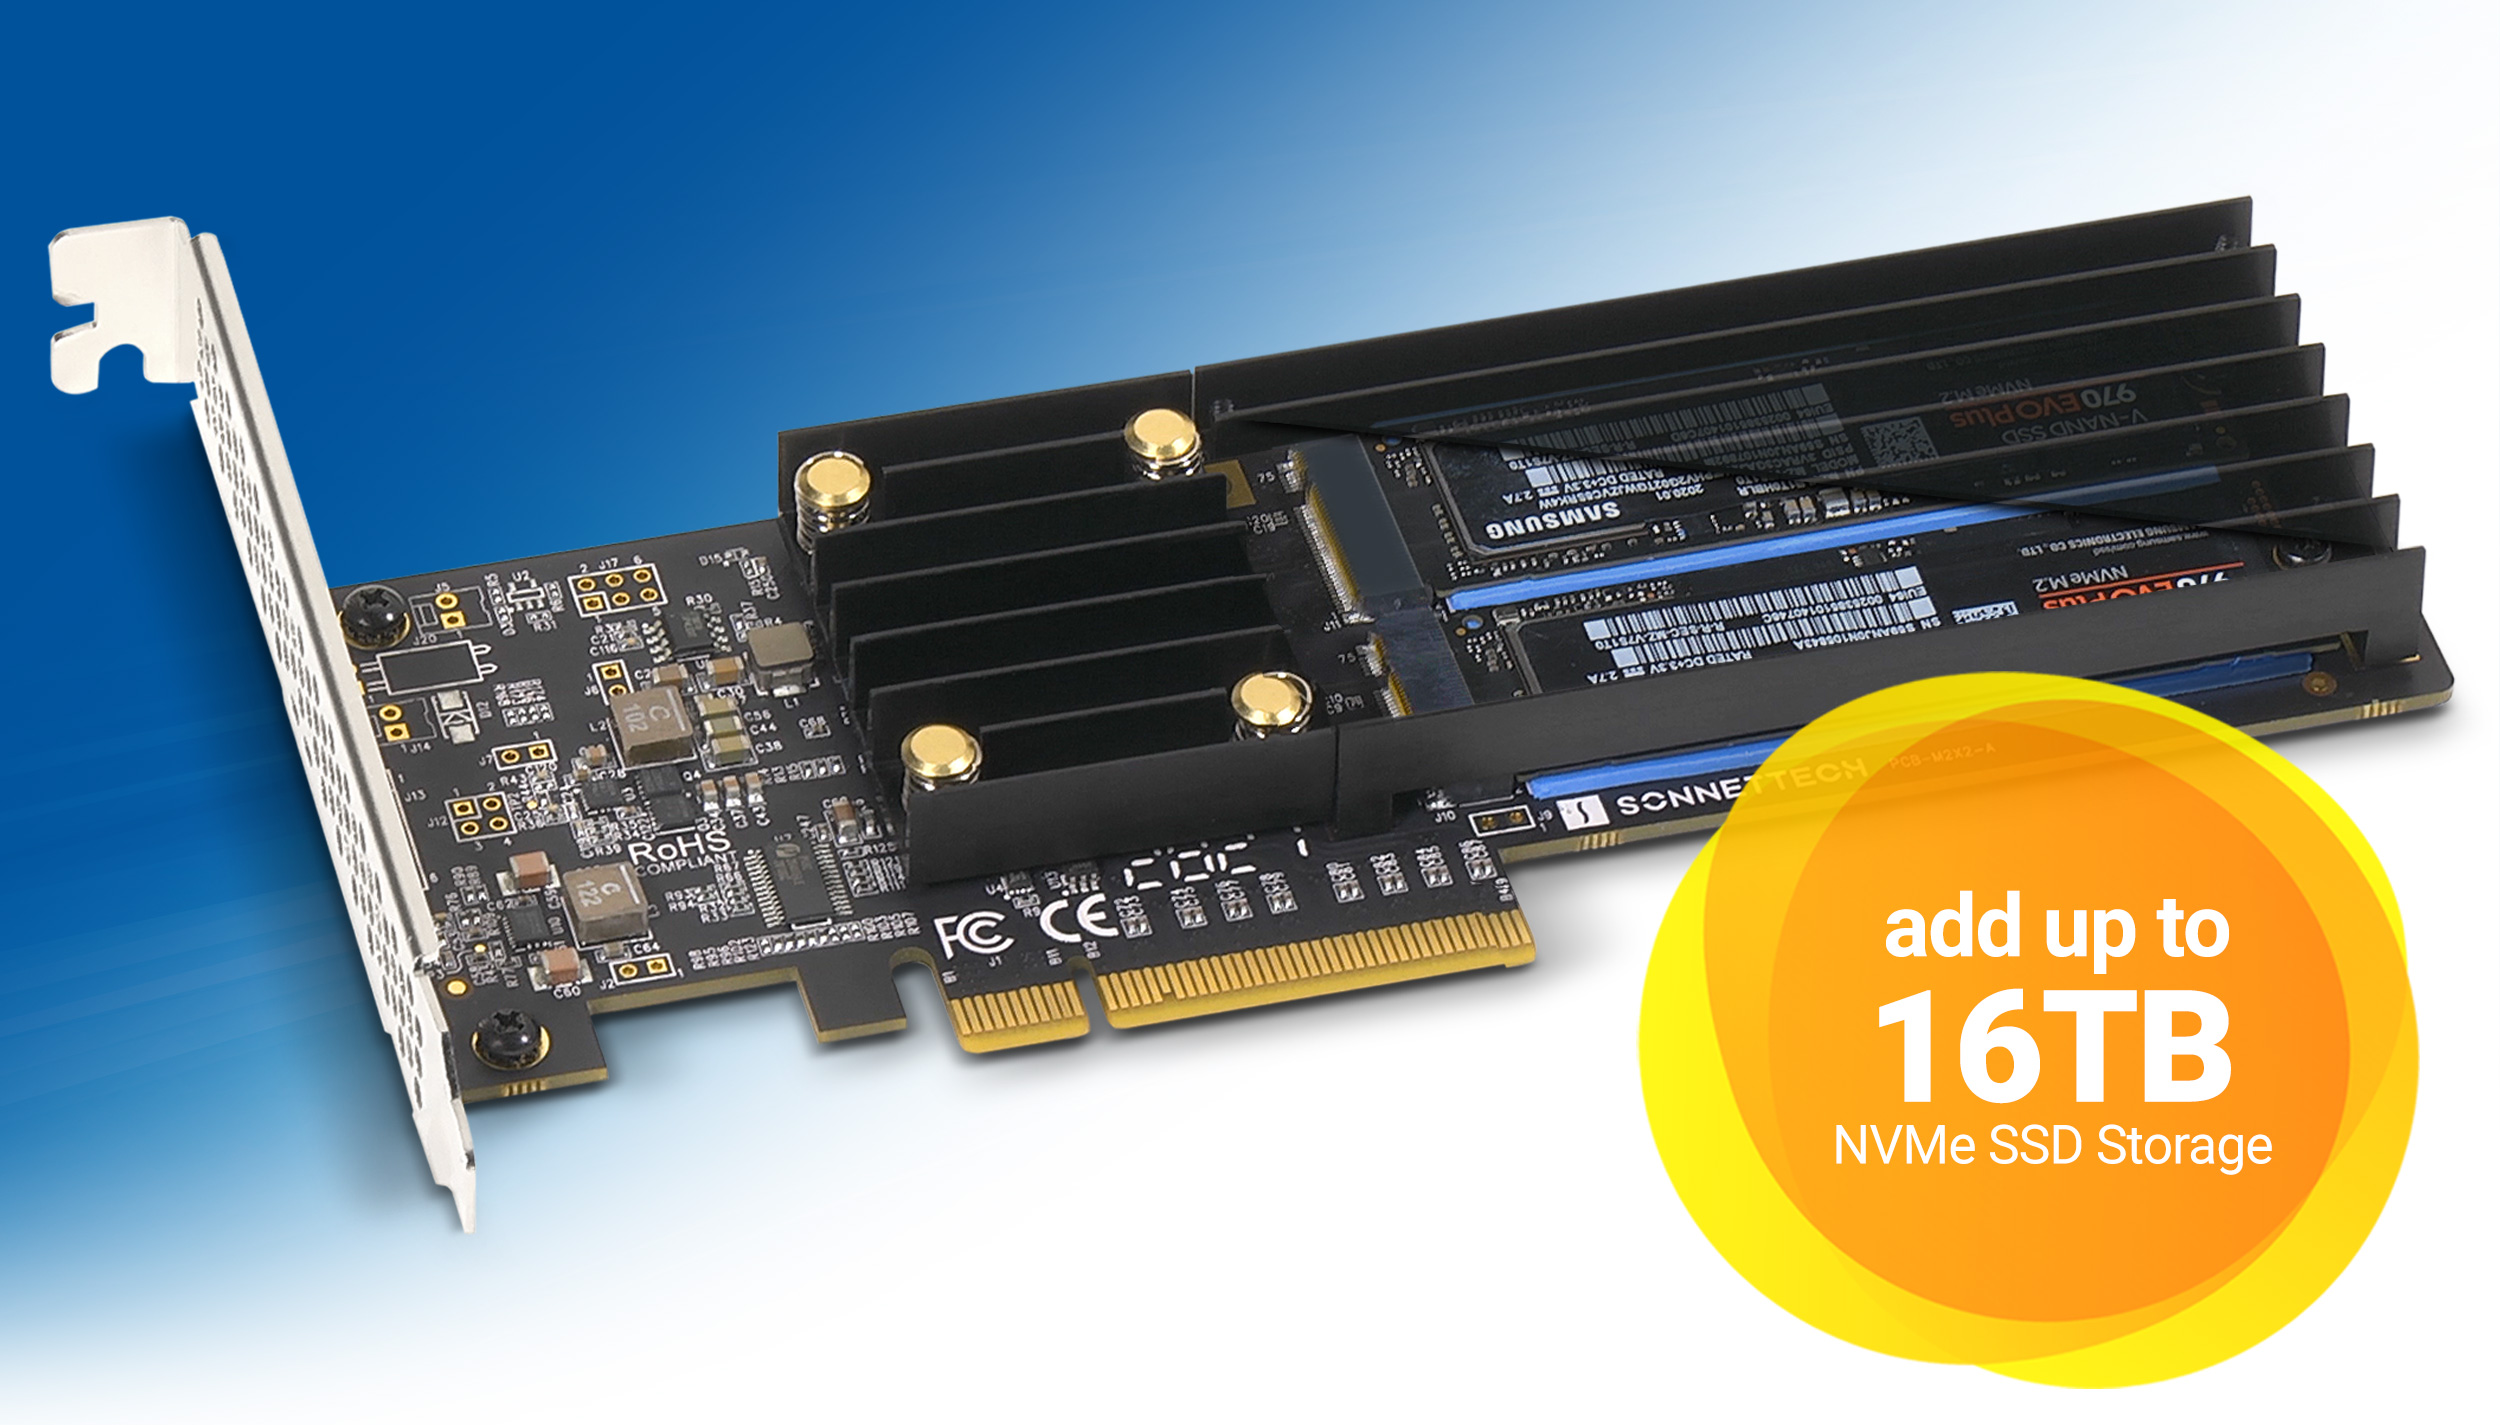 Sonnet M.2 2x4 Low-profile PCIe Card - Add up to 16TB NVMe SSD Storage